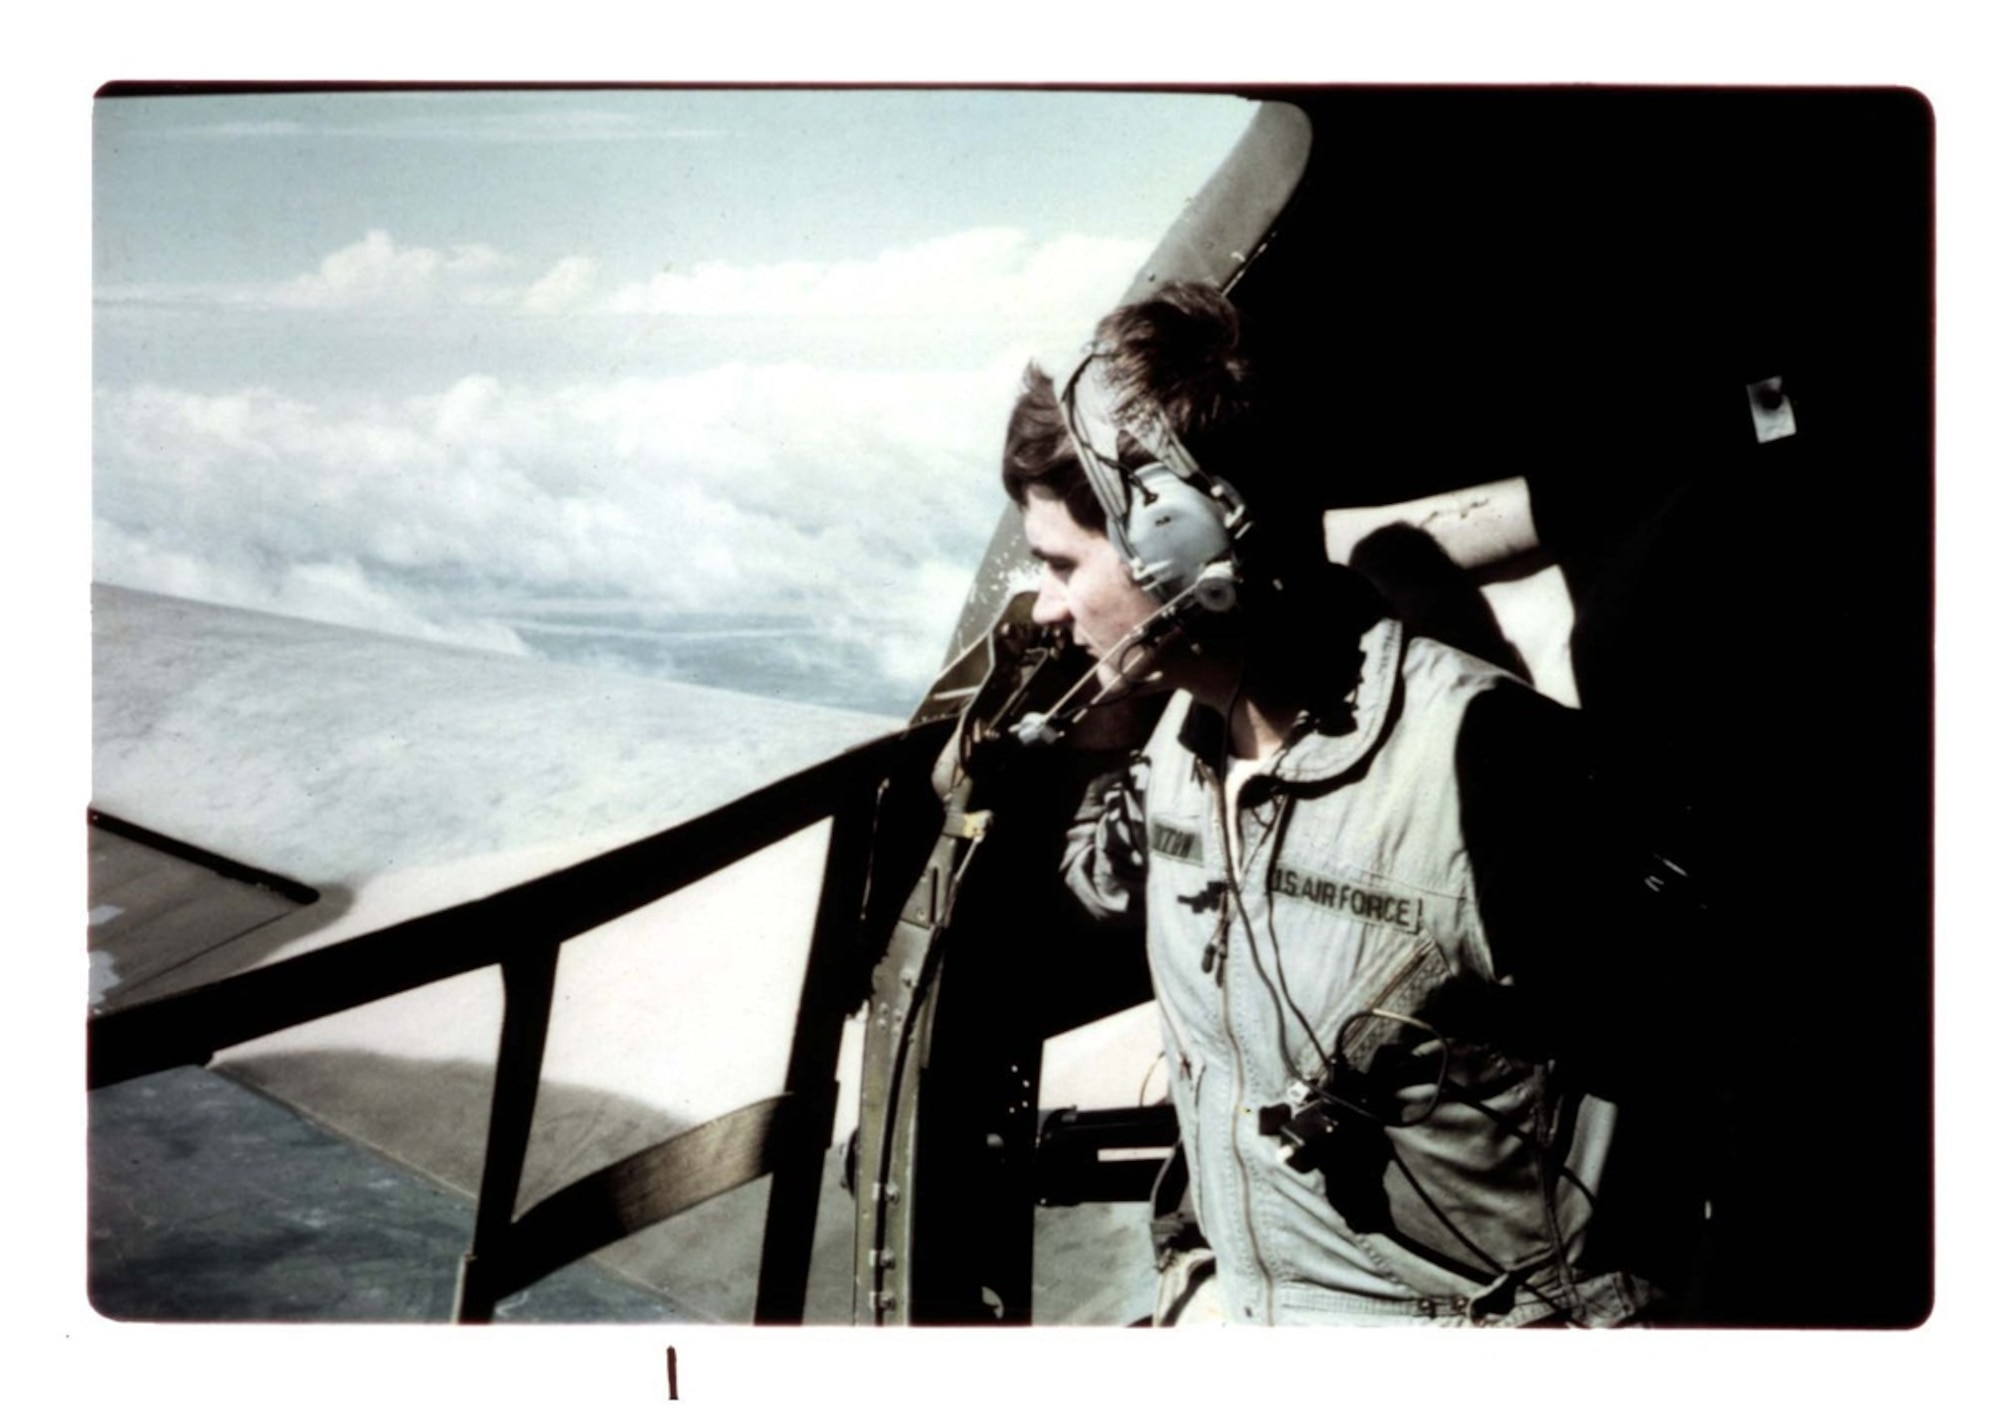 John L. Levitow is shown looking out of the aircraft in this file photo from his active-duty Air Force days as a loadmaster. (U.S. Air Force photo)